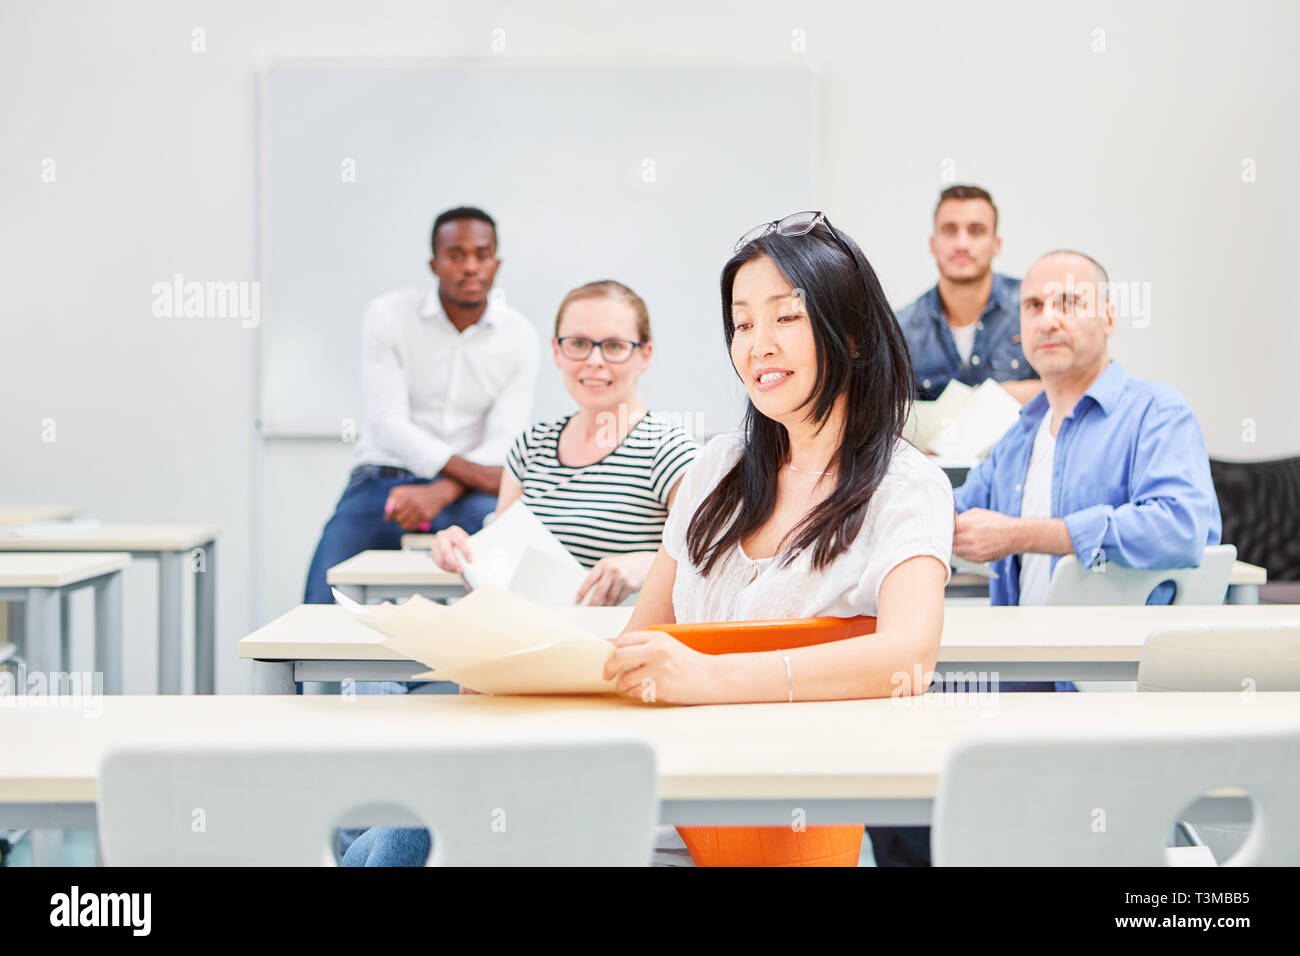 Group of students learning together in a university seminar or training Stock Photo